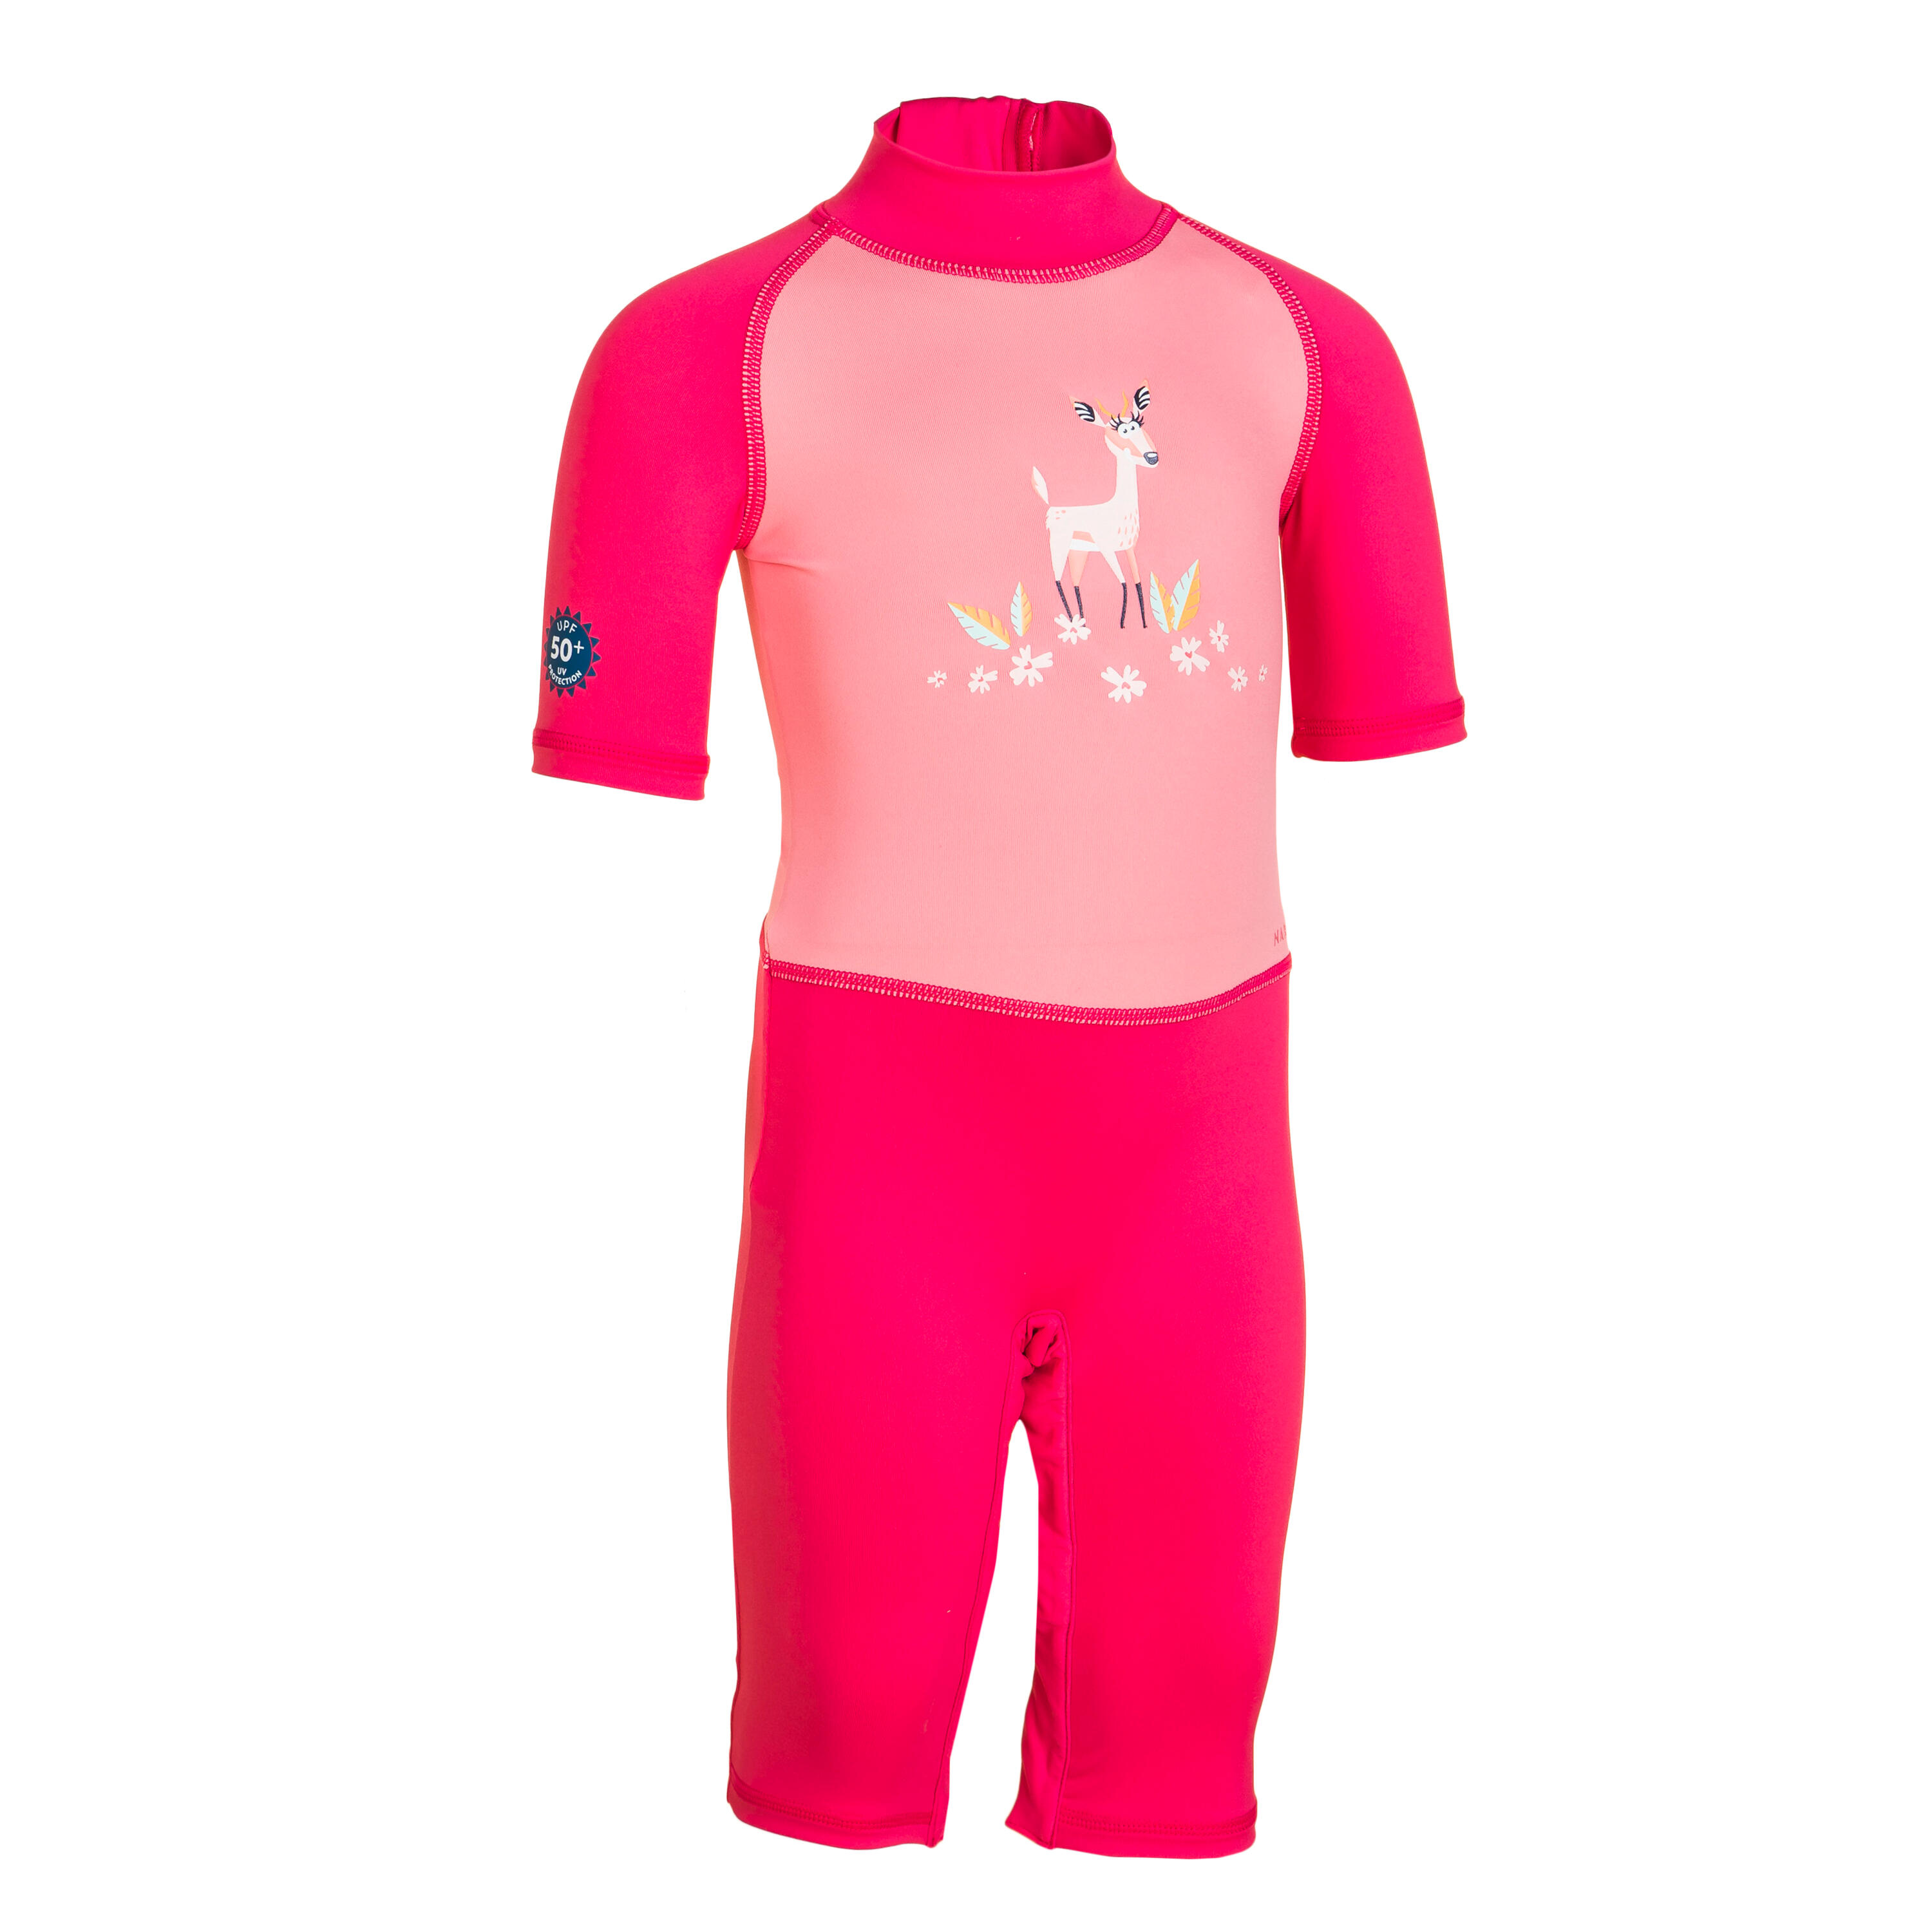 Baby / Kids' Swimming Short Sleeve UV-Protection Suit - Pink Print 3/3